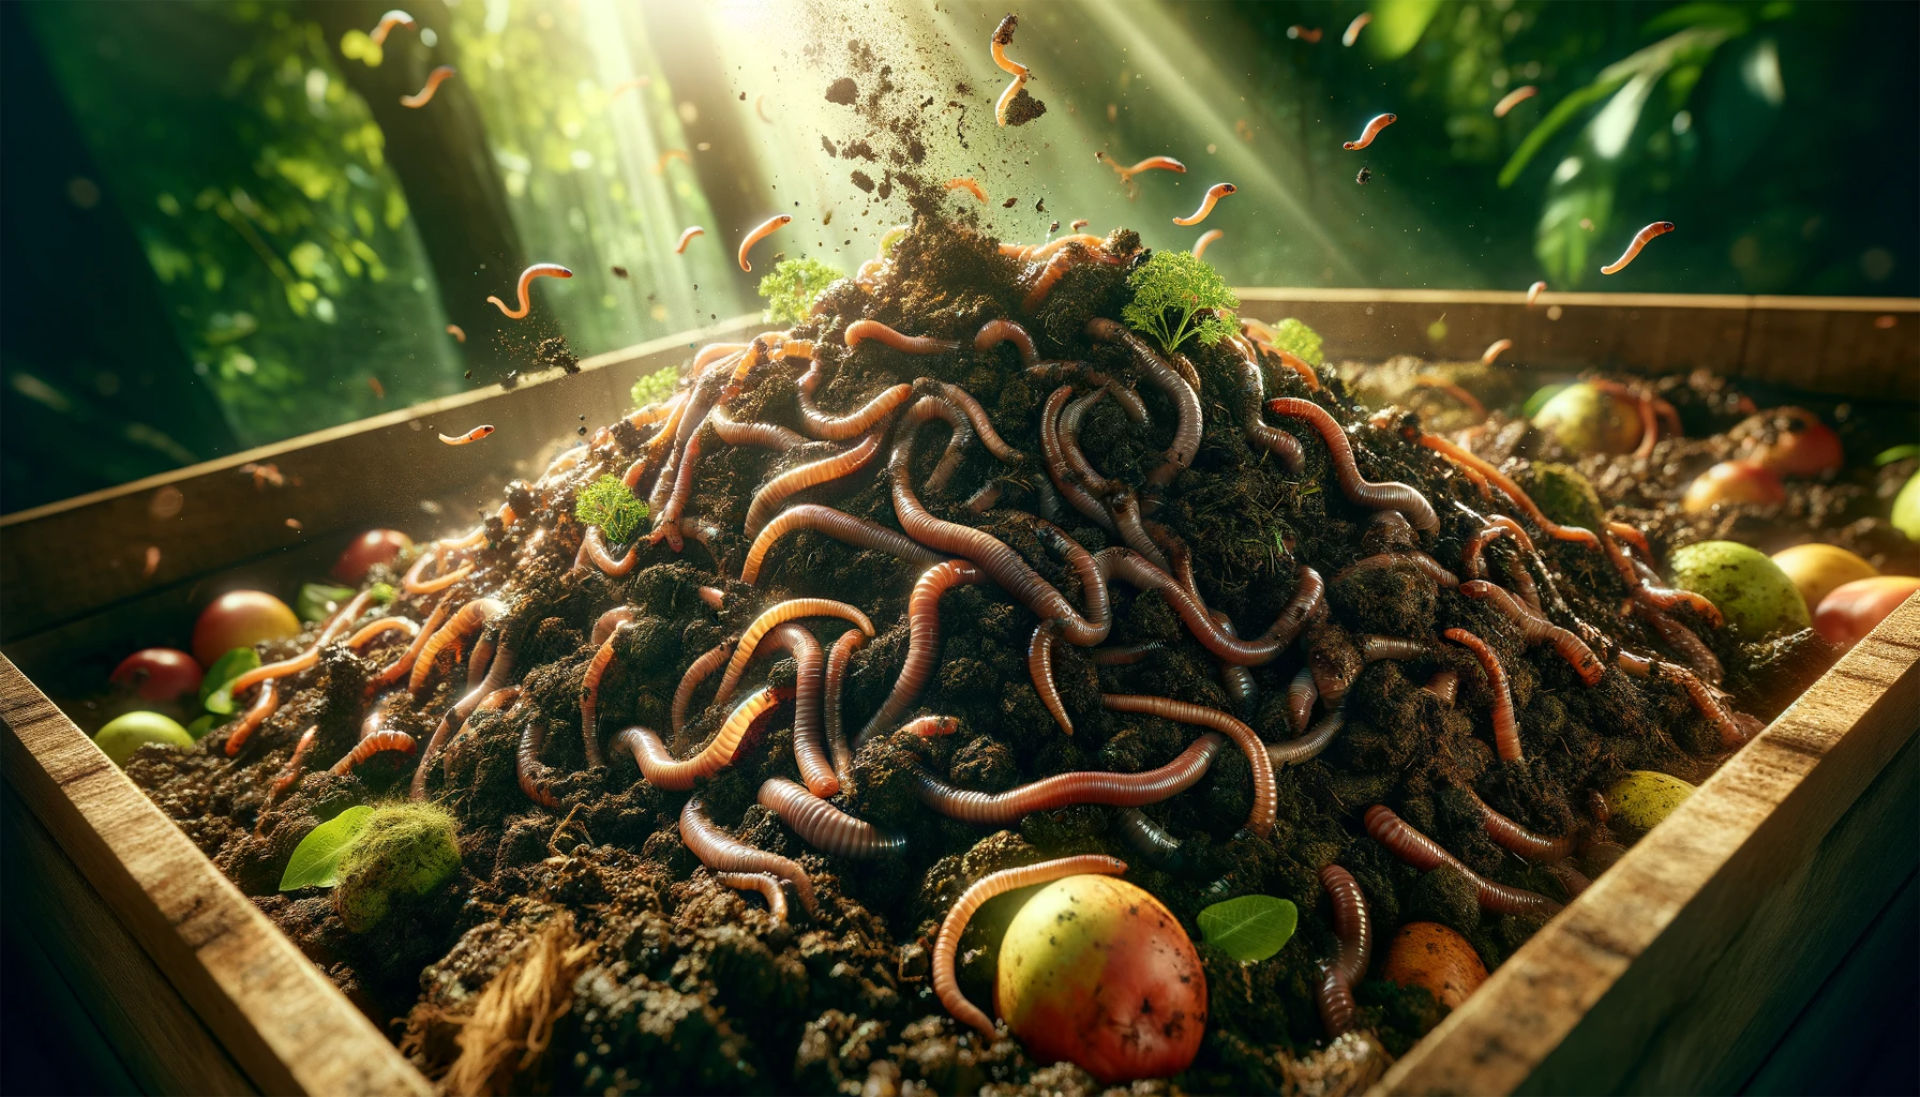 Featured image captures the overarching theme of vermicomposting, illustrating the process of worms transforming waste into compost. It features a blend of worms, rich soil, and decomposing organic matter in a natural and vibrant setting. This image is designed to serve as the featured article image, embodying the environmentally friendly and sustainable nature of vermicomposting, and highlighting the beneficial impact of worms in this eco-friendly process.